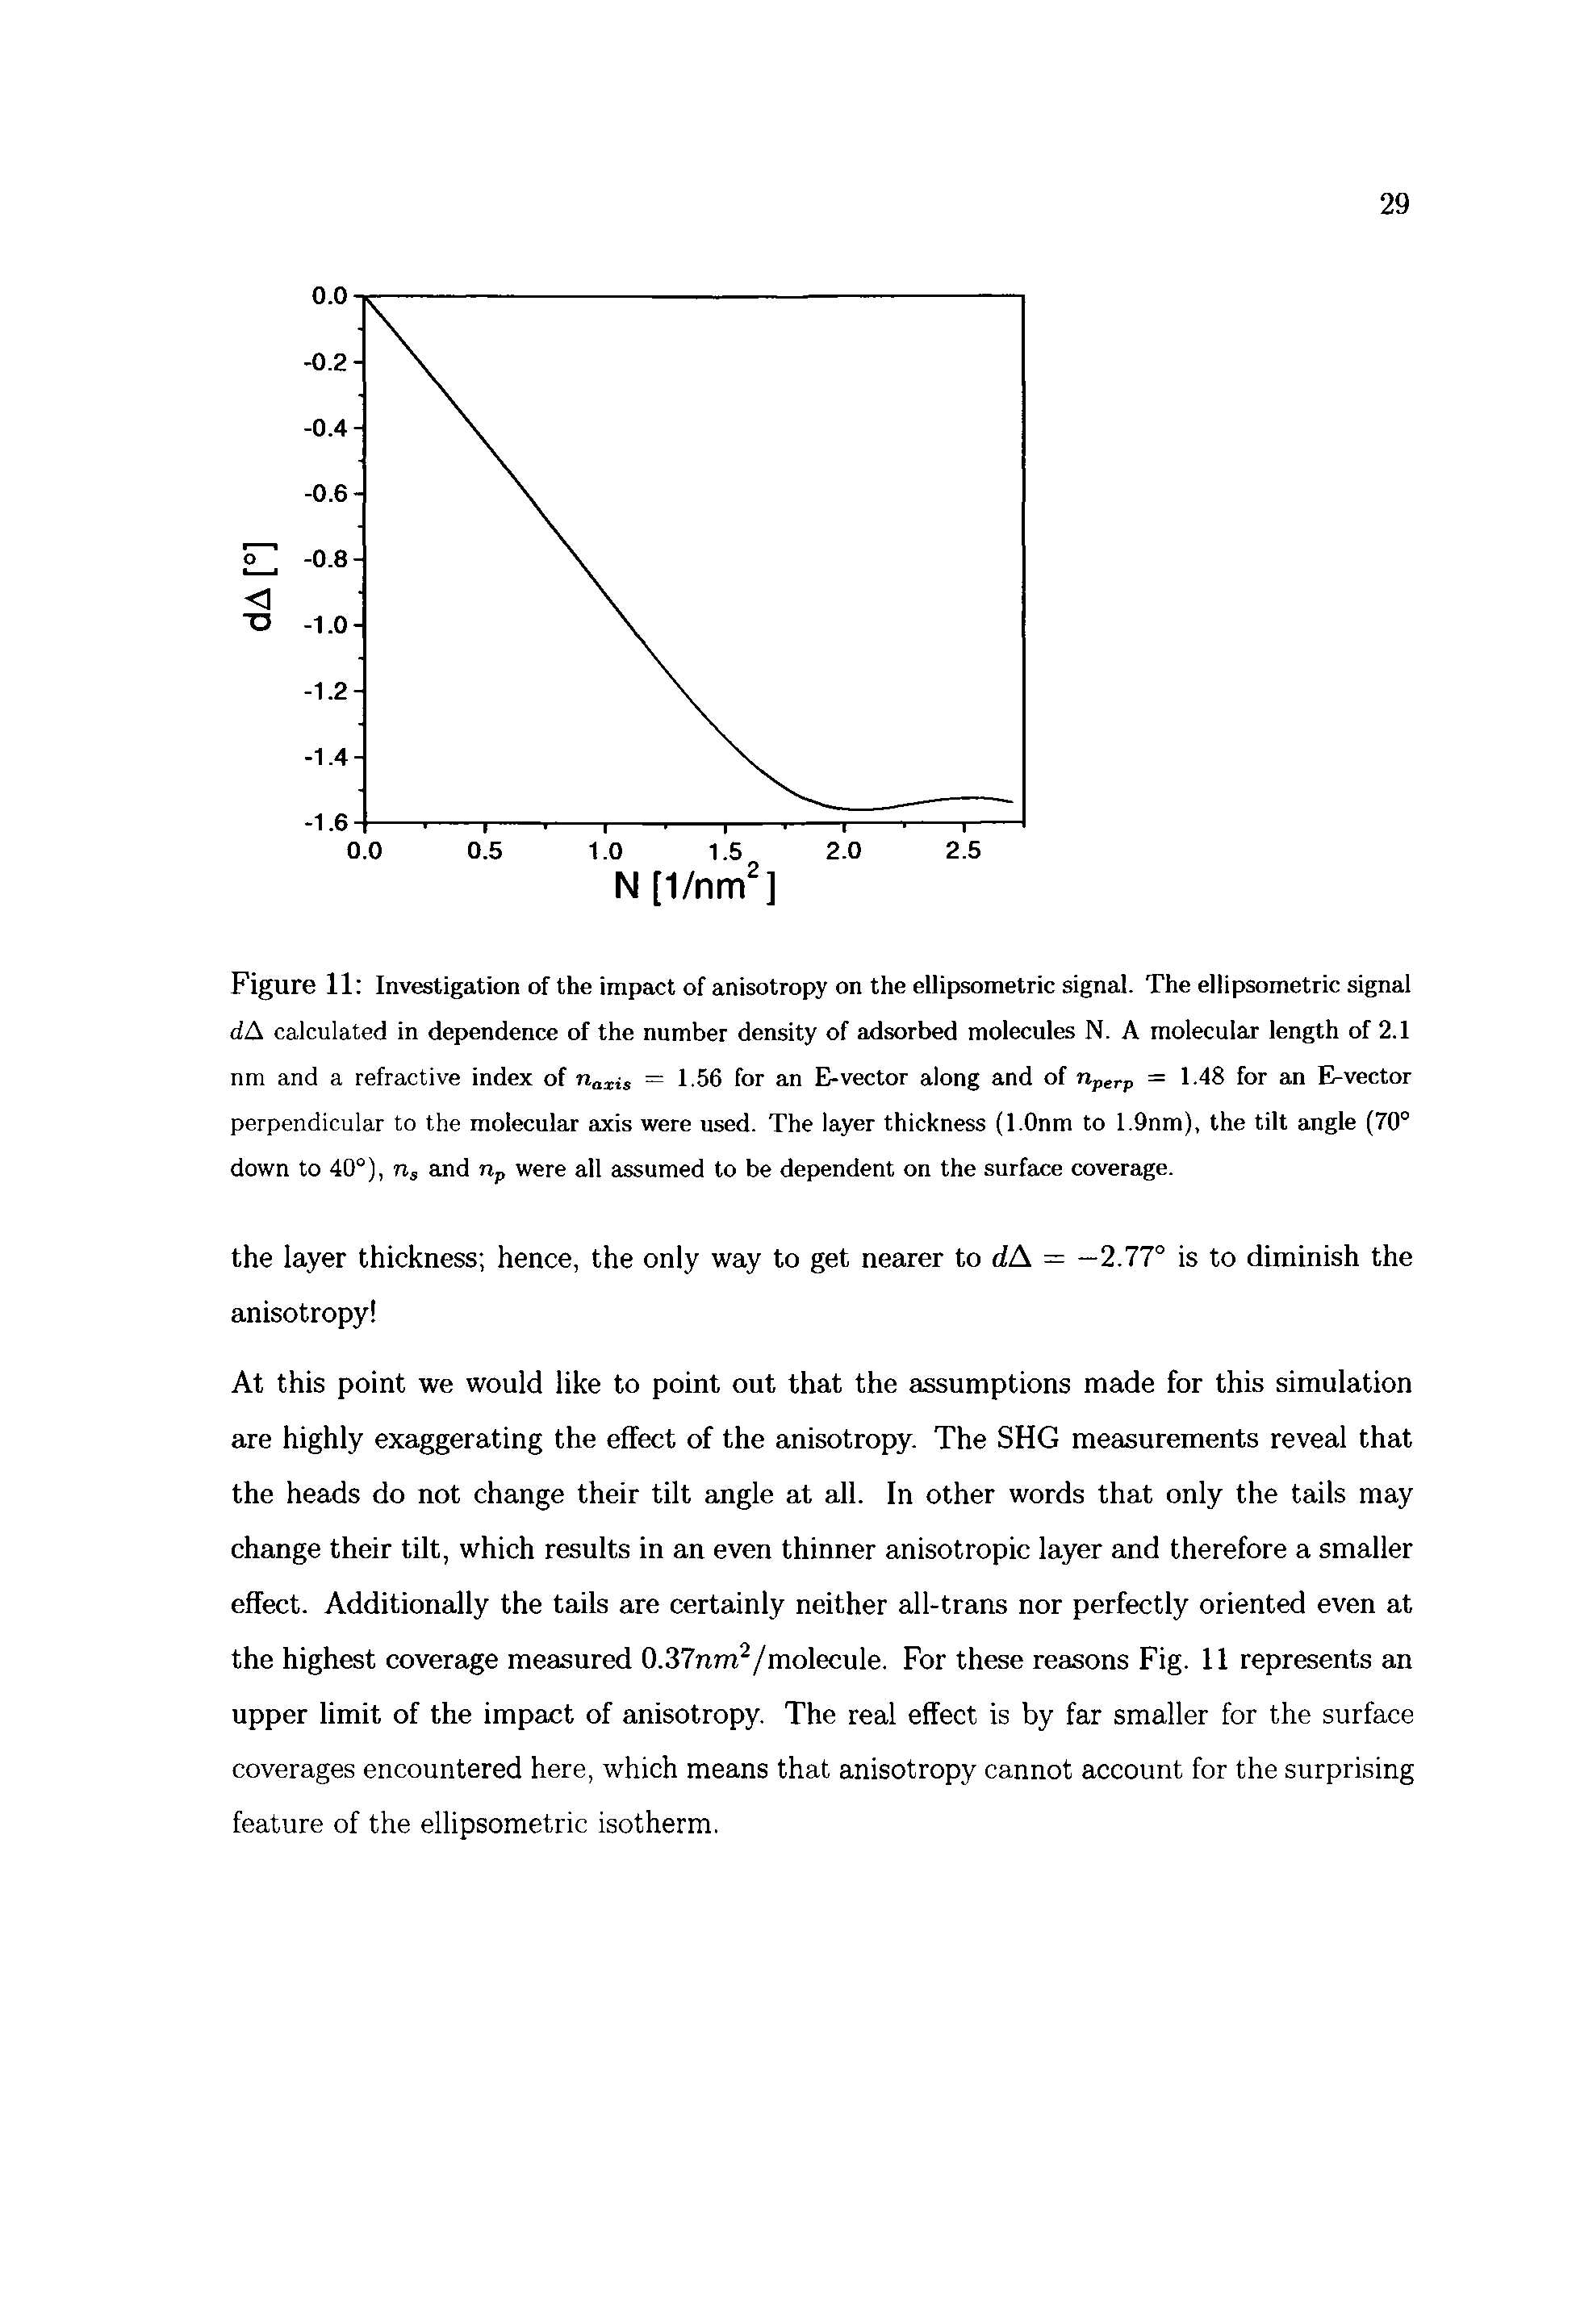 Figure 11 Investigation of the impact of anisotropy on the ellipsometric signal. The ellipsometric signal dA calculated in dependence of the number density of adsorbed molecules N. A molecular length of 2.1 nm and a refractive index of riaxis = 1-56 for an E-vector along and of np rp = 1.48 for an E-vector perpendicular to the molecular axis were used. The layer thickness (l.Onm to 1.9nm), the tilt angle (70° down to 40°), n, and were all assumed to be dependent on the surface coverage.